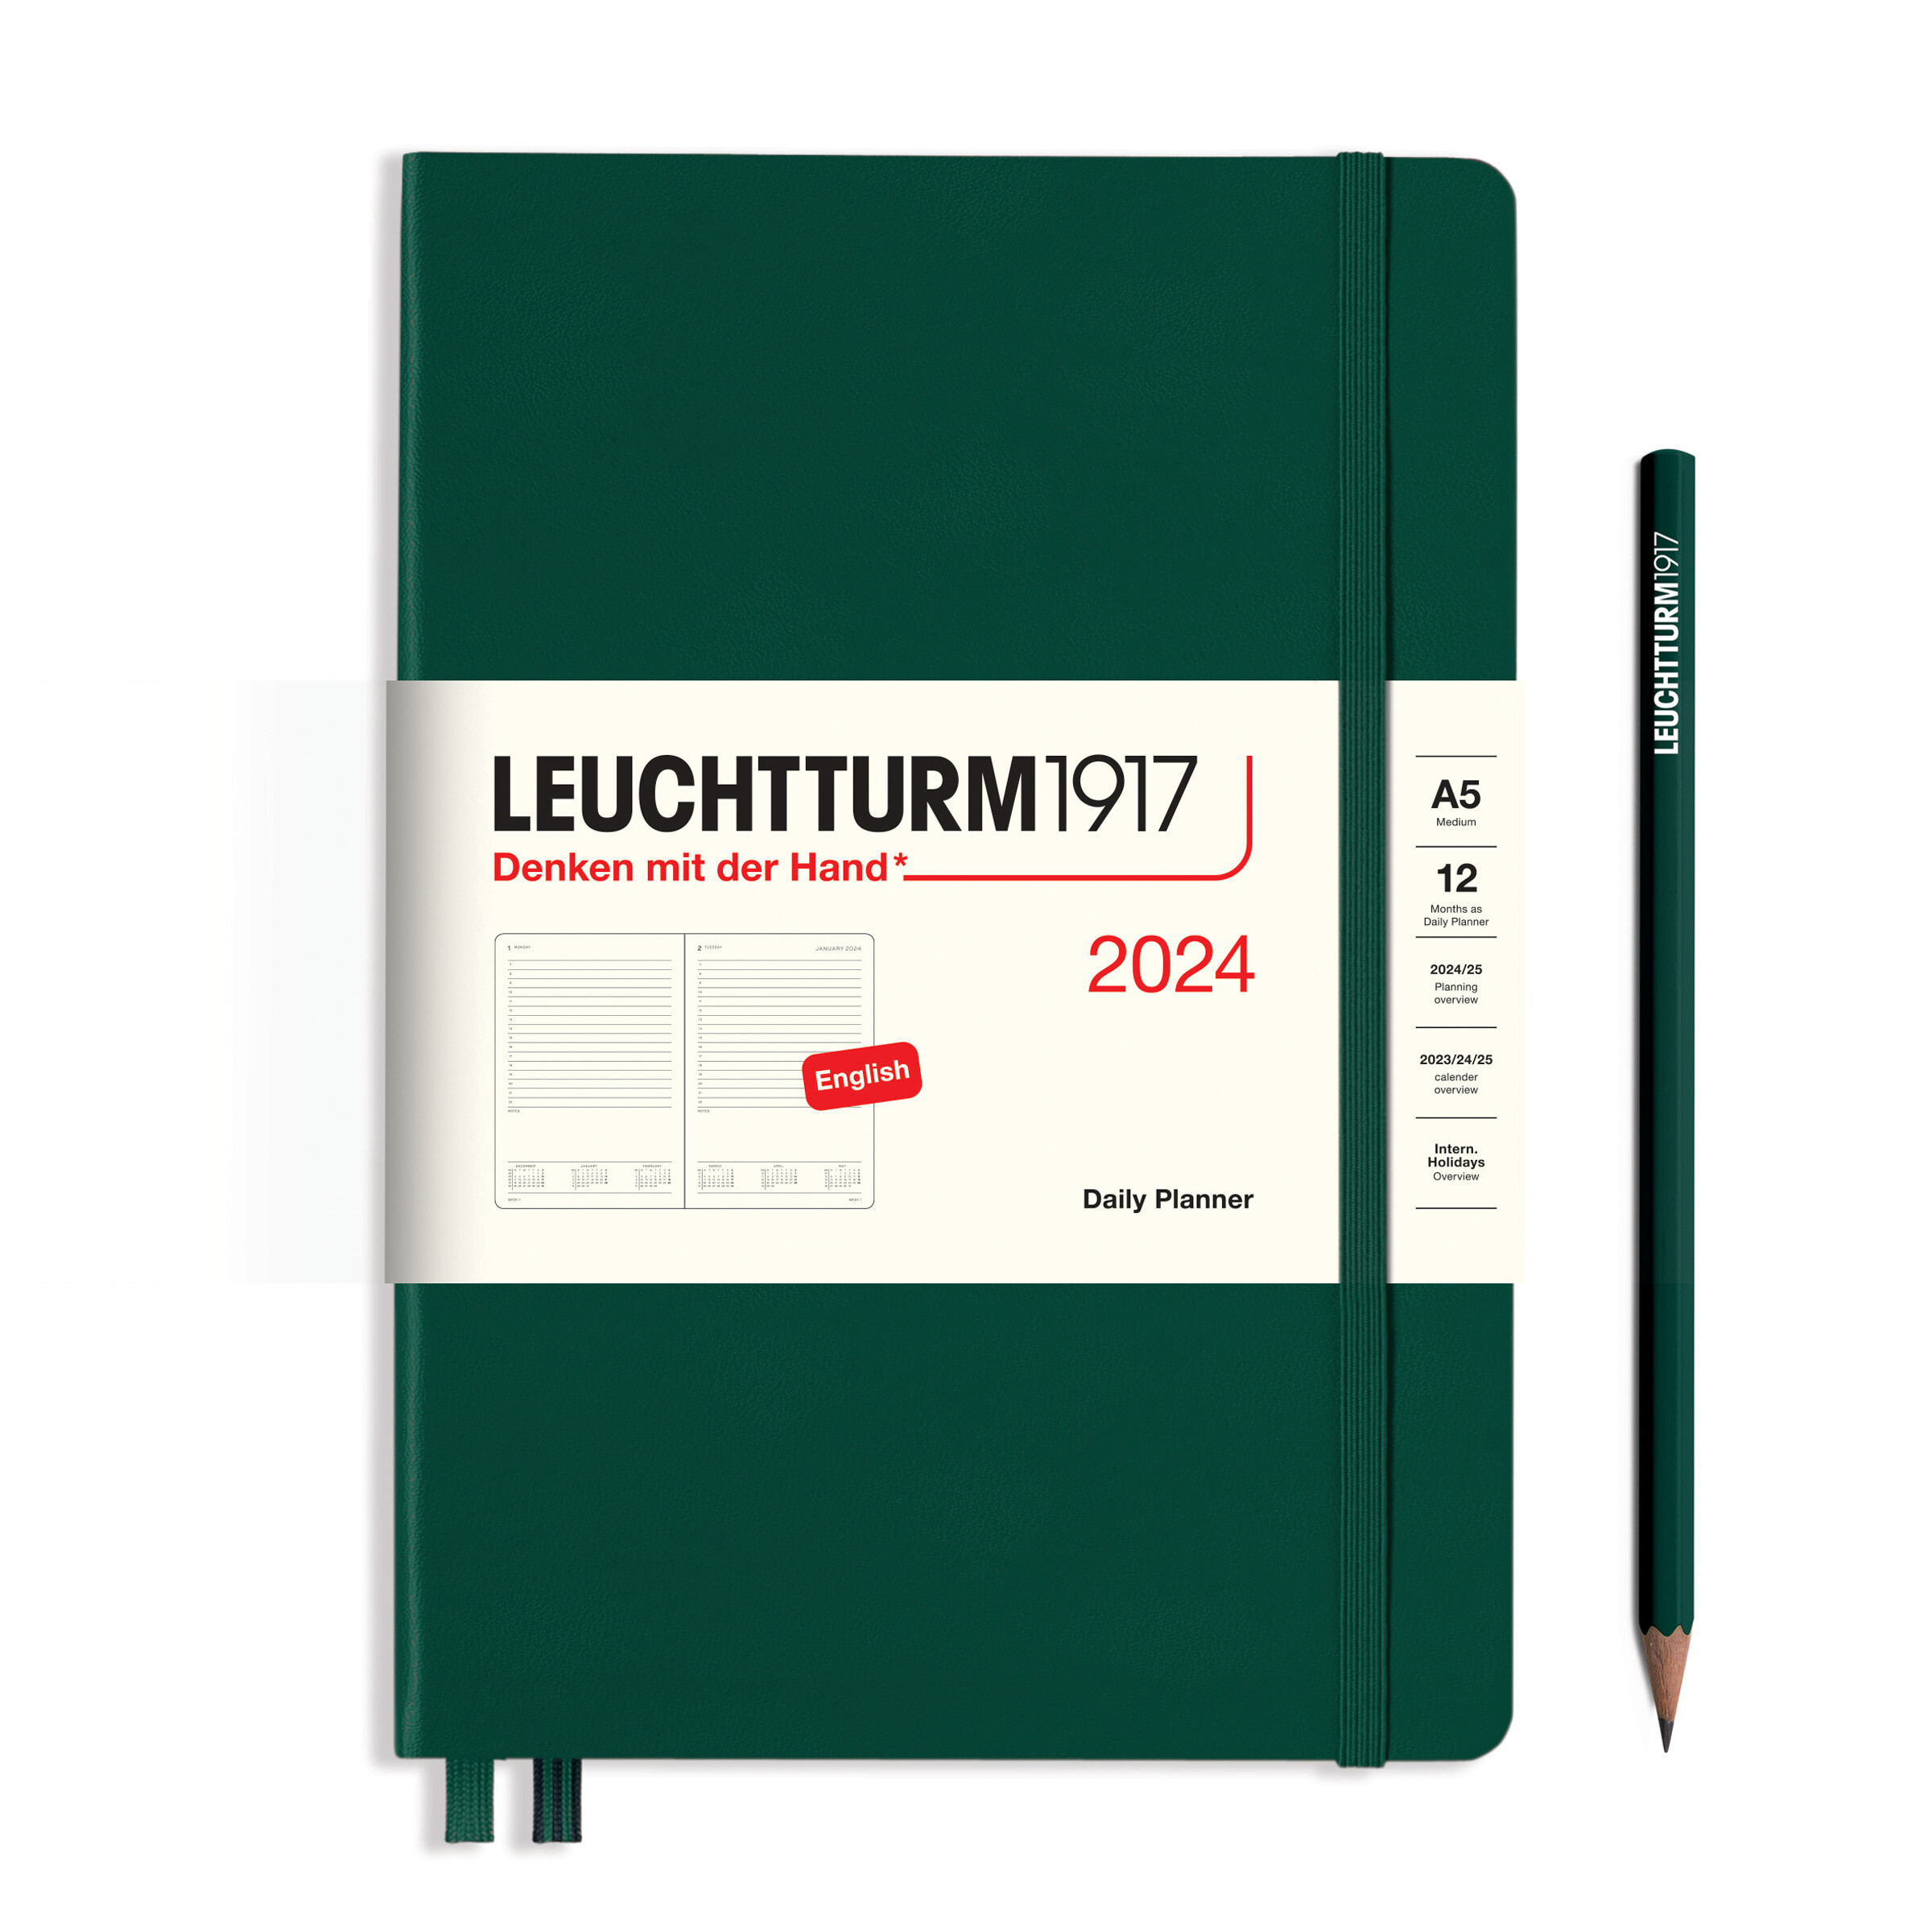 Leuchtturm1917 Daily Planner Hard Cover Medium (A5) 2024 - Pencraft the boutique